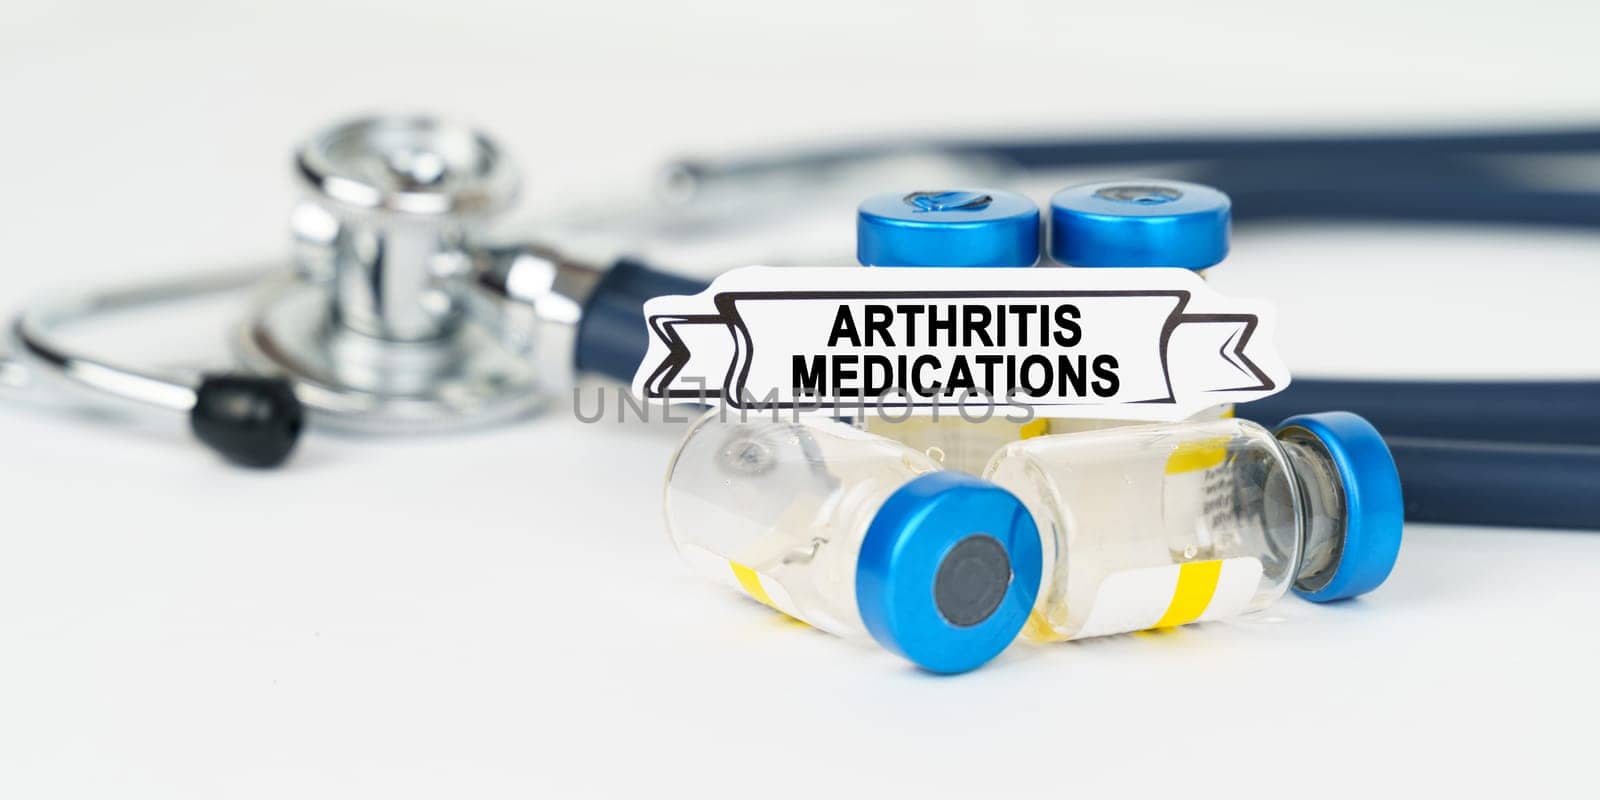 On the table there is a stethoscope, injections and a sign with the inscription - Arthritis medications by Sd28DimoN_1976